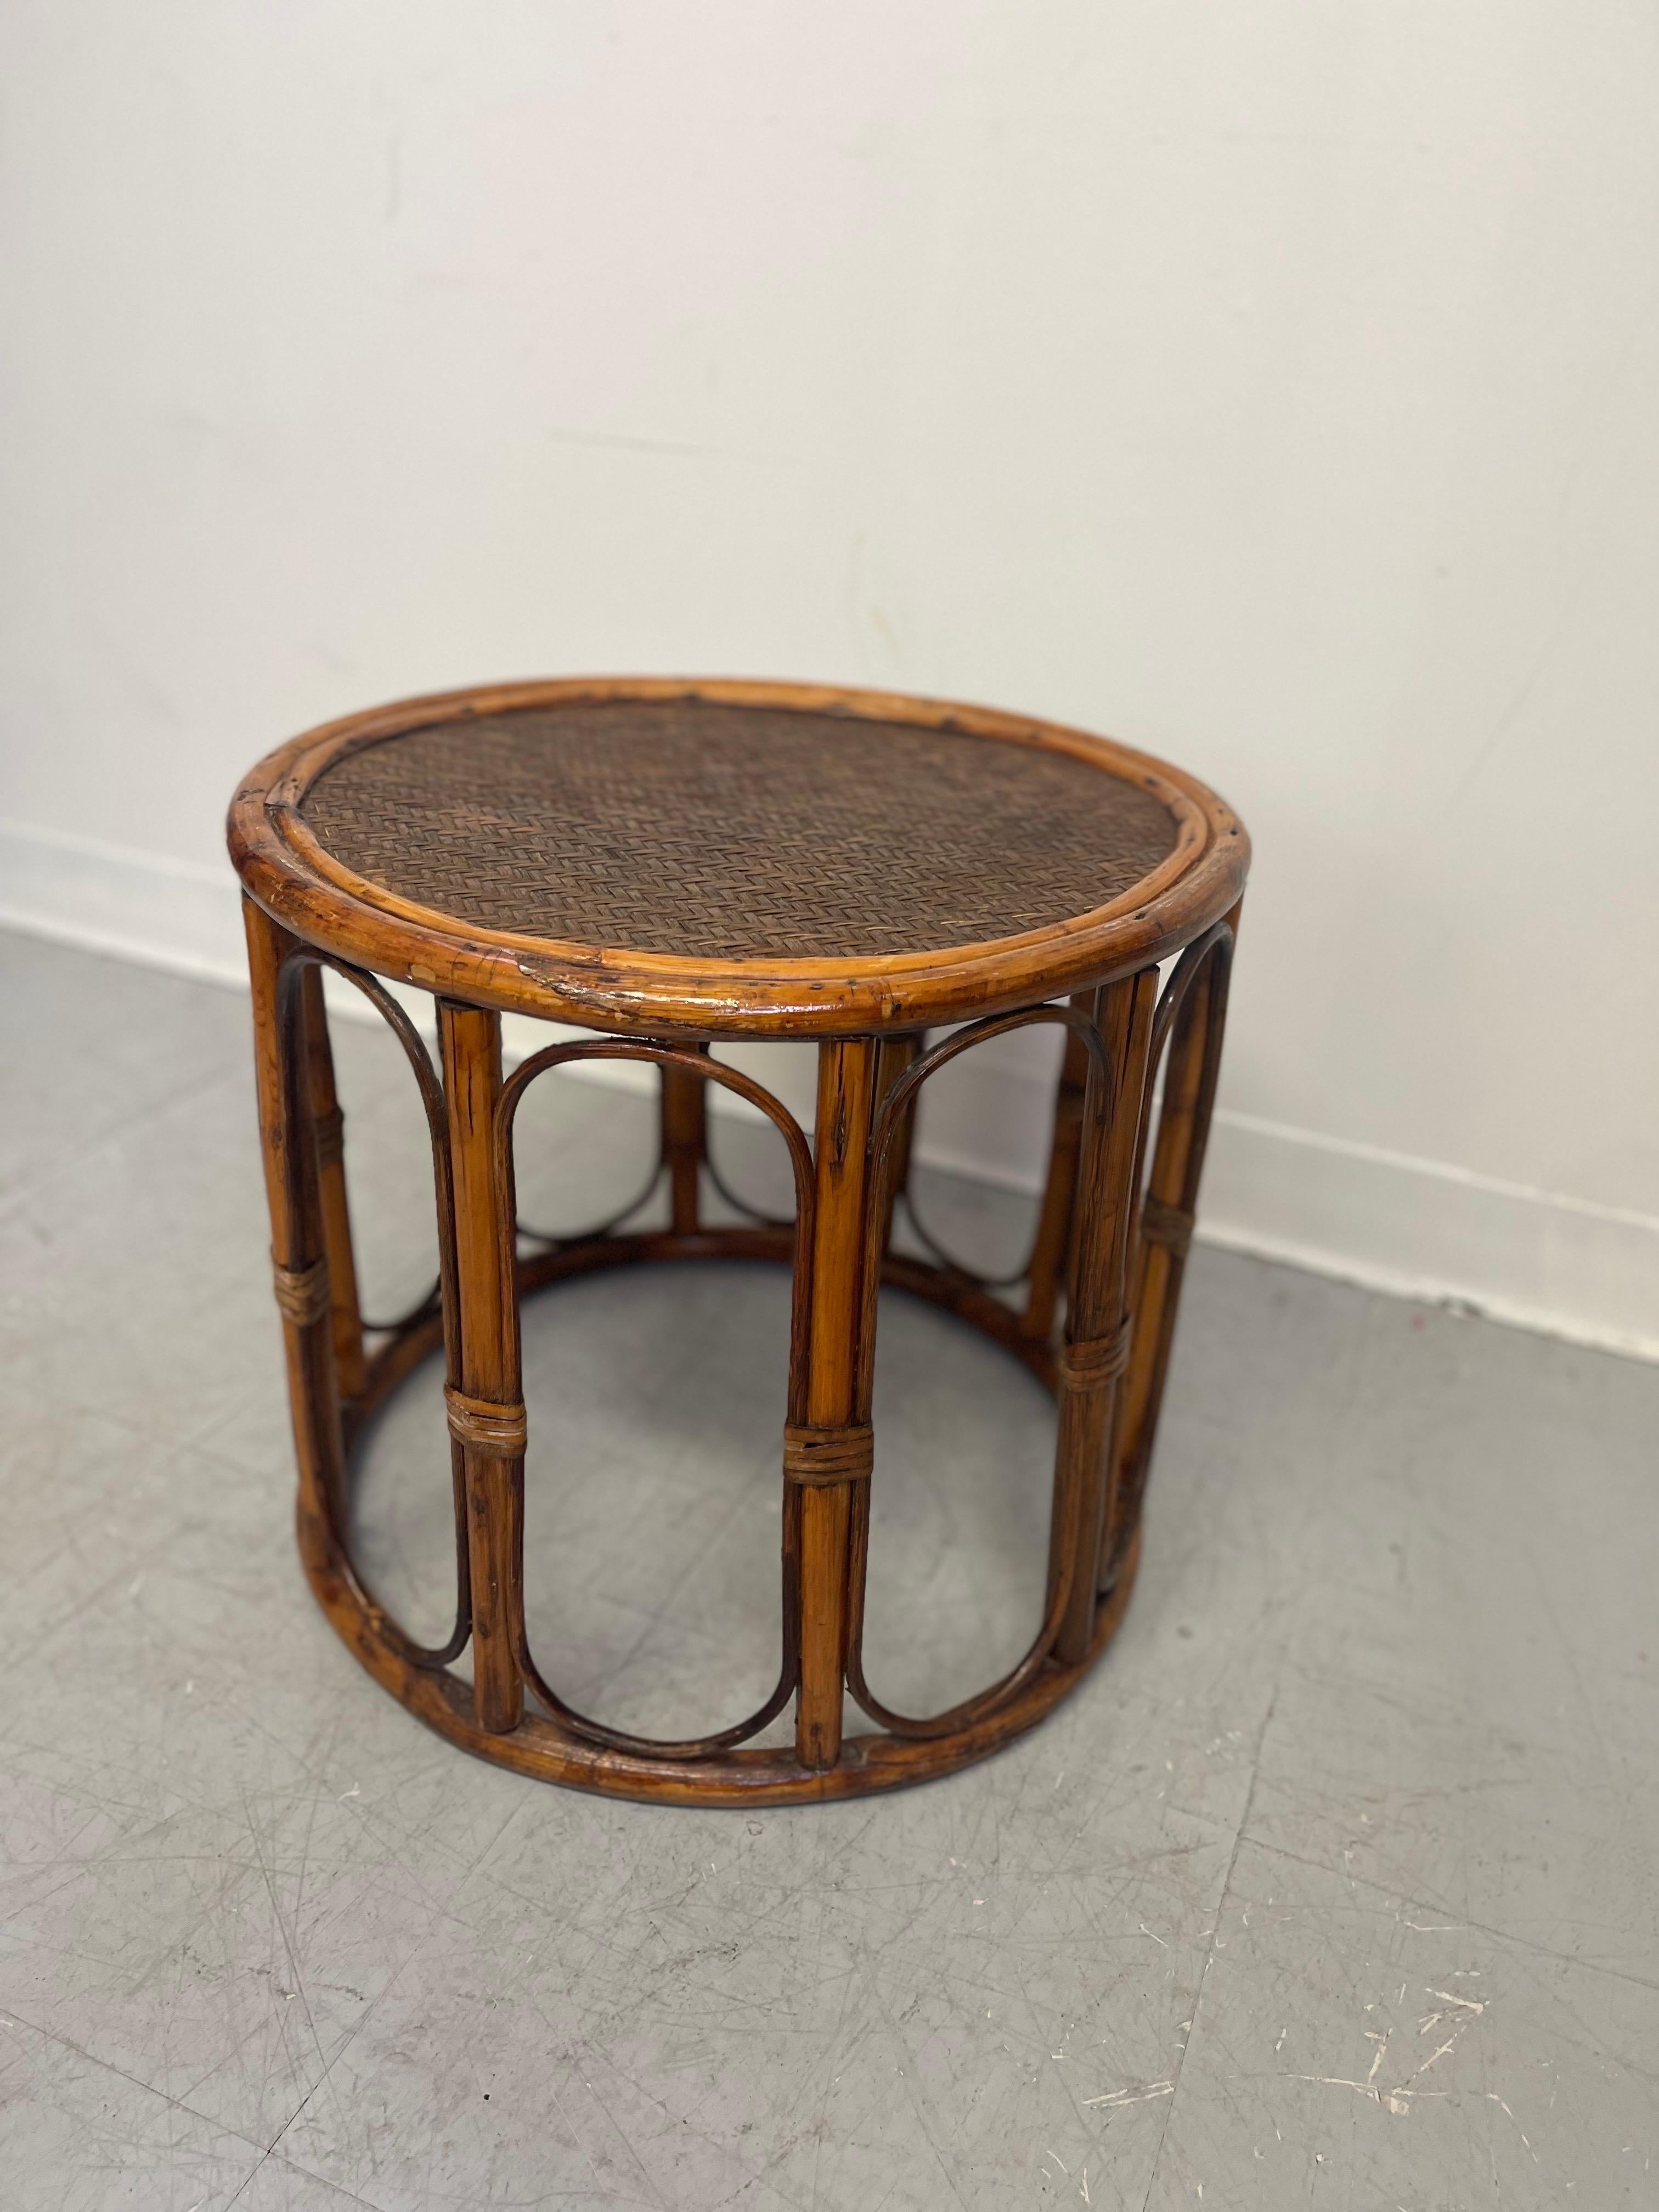 Vintage Rattan Caning Circular
Side Table In Good Condition For Sale In Seattle, WA